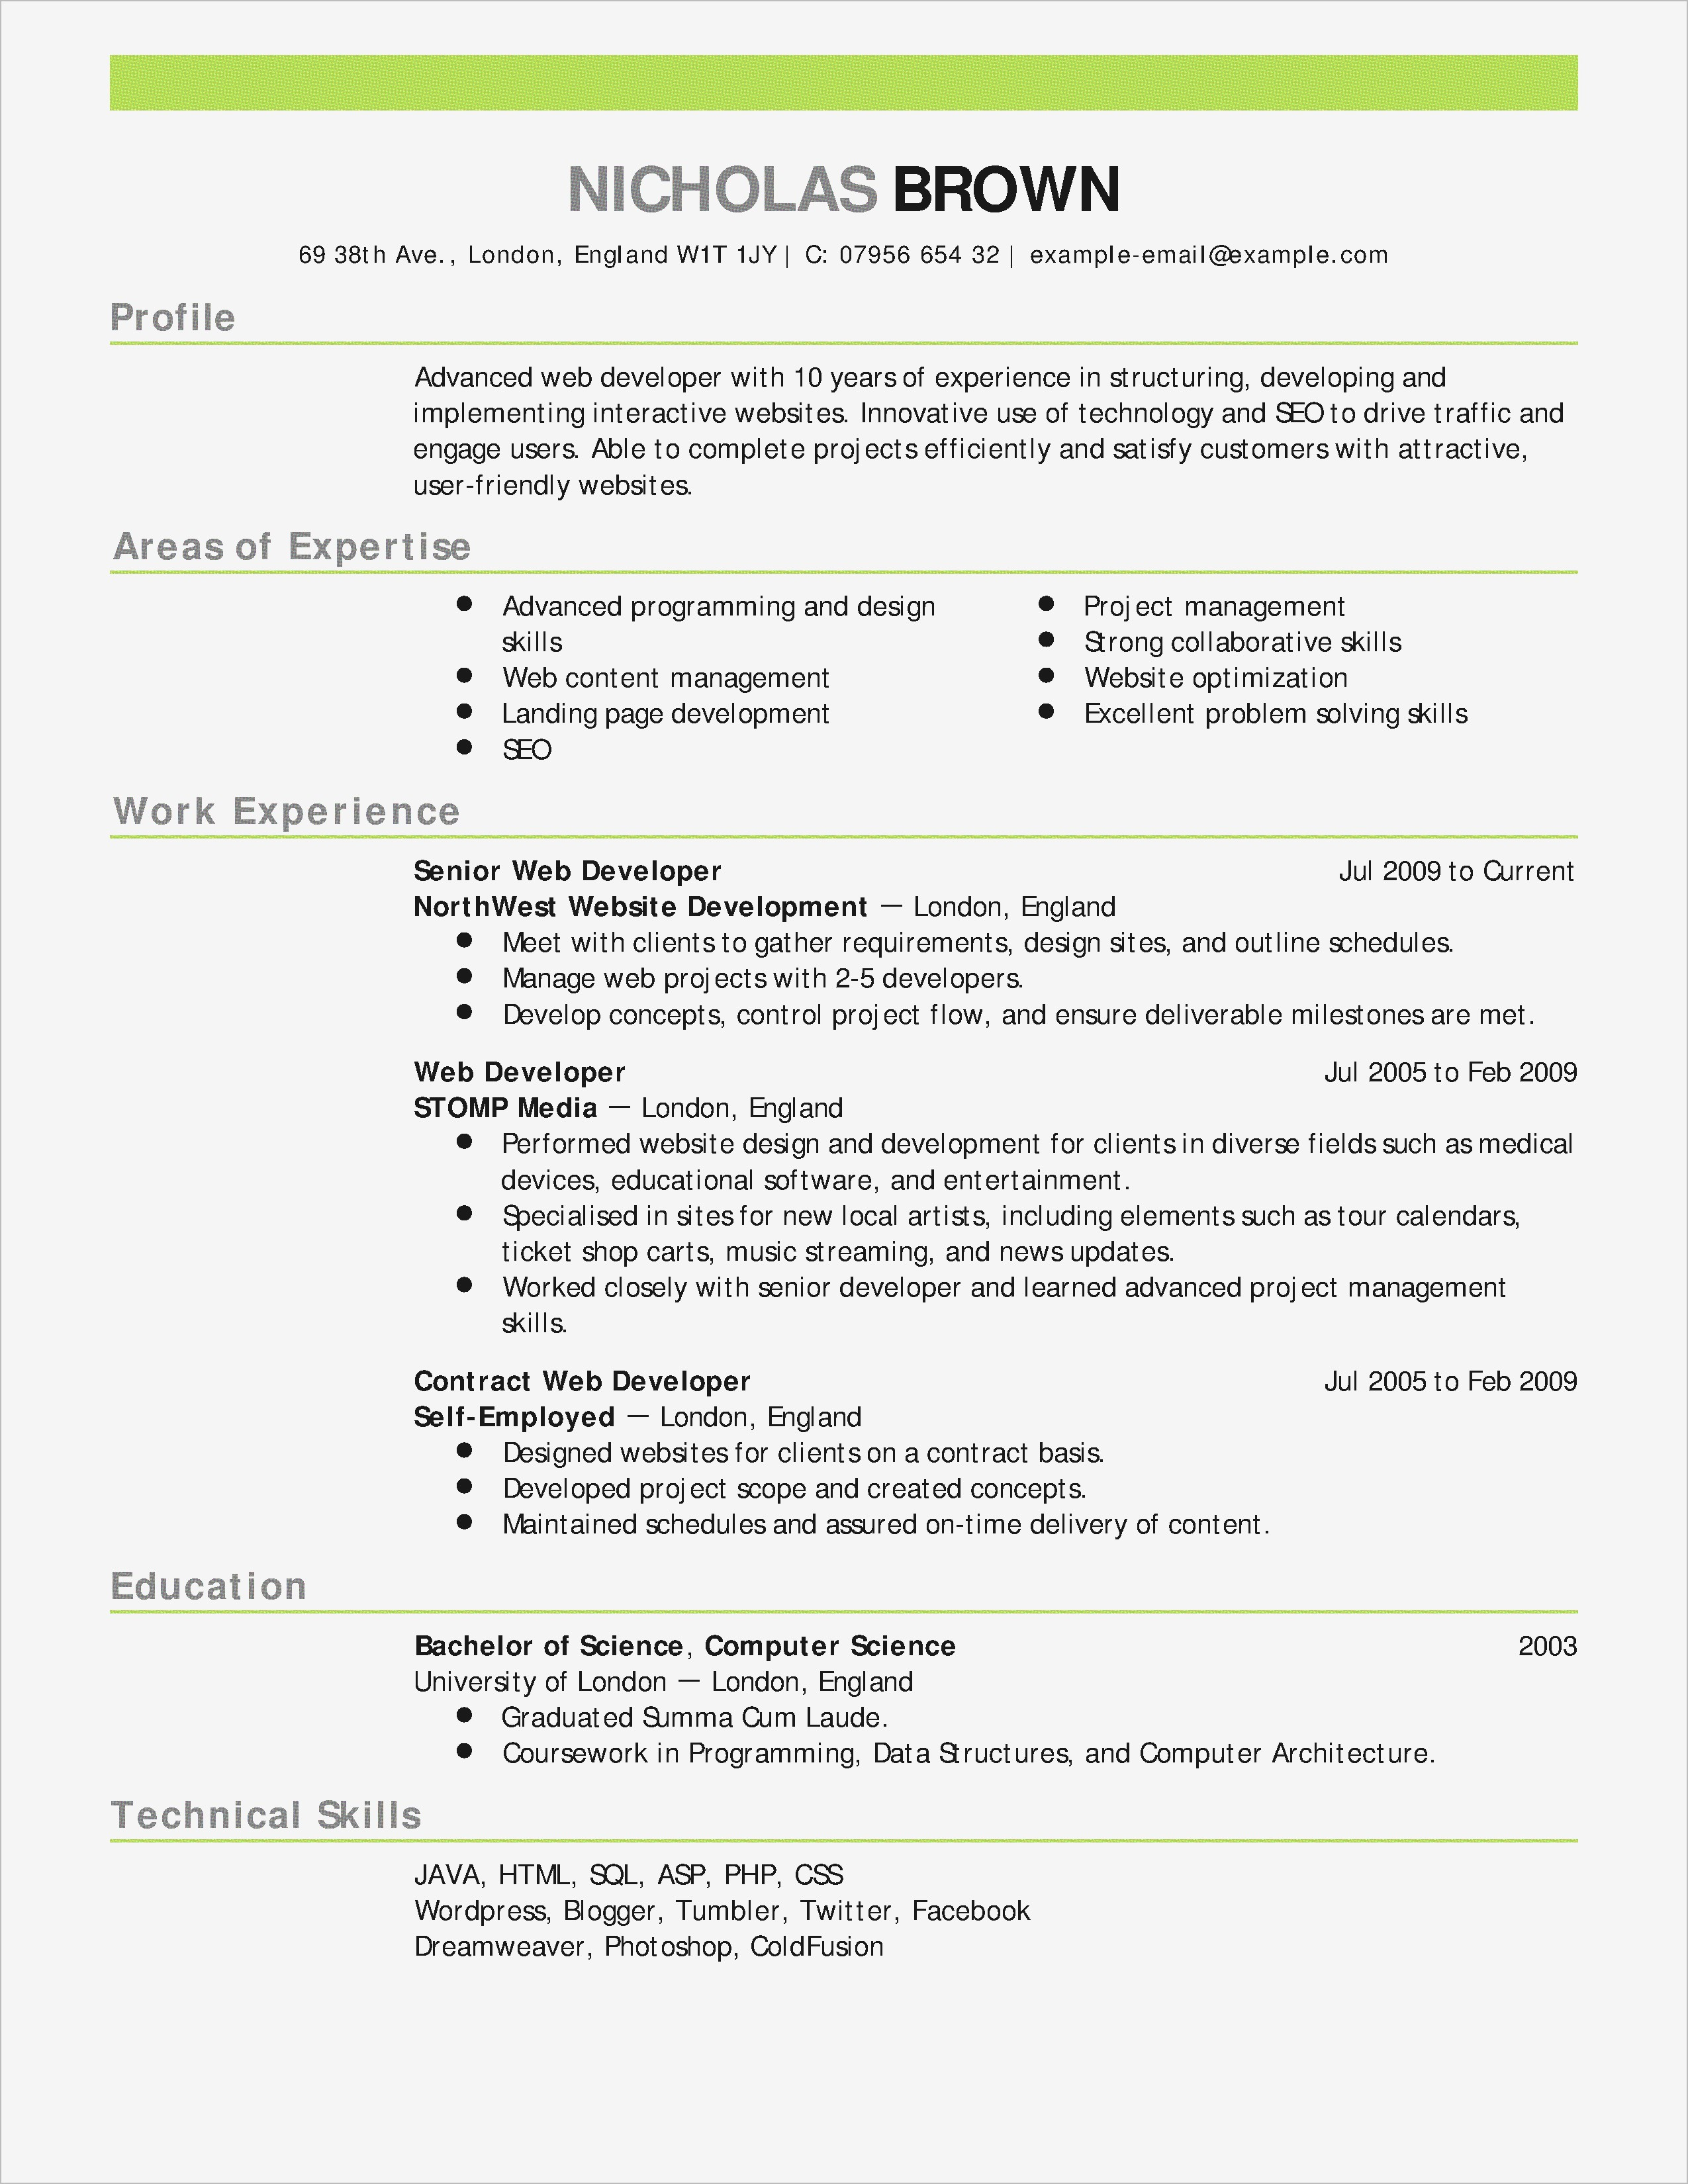 Letter Of Agreement Template Free - Example A Cover Letter for A Job Resume Ideas